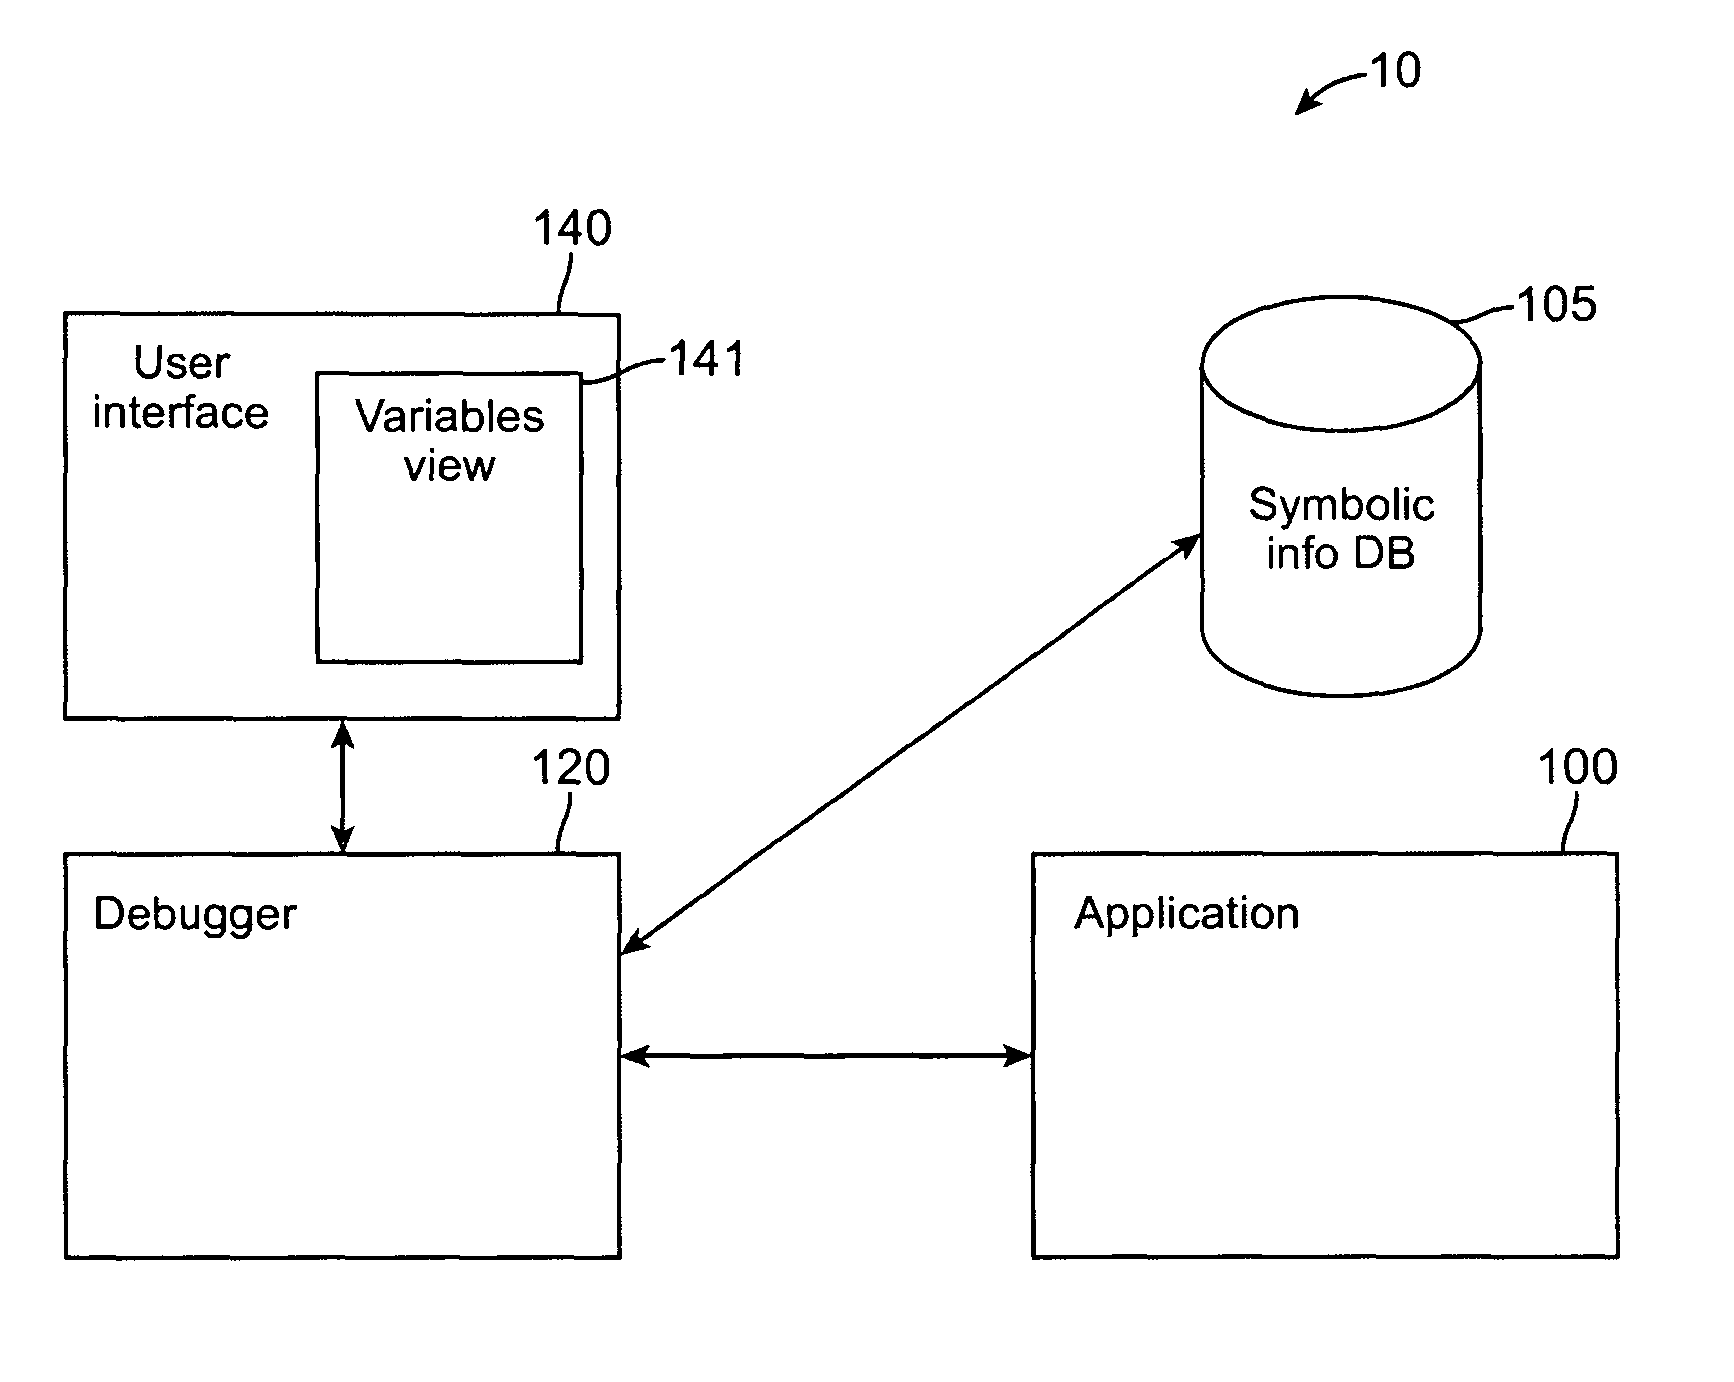 System and process for debugging object-oriented programming code